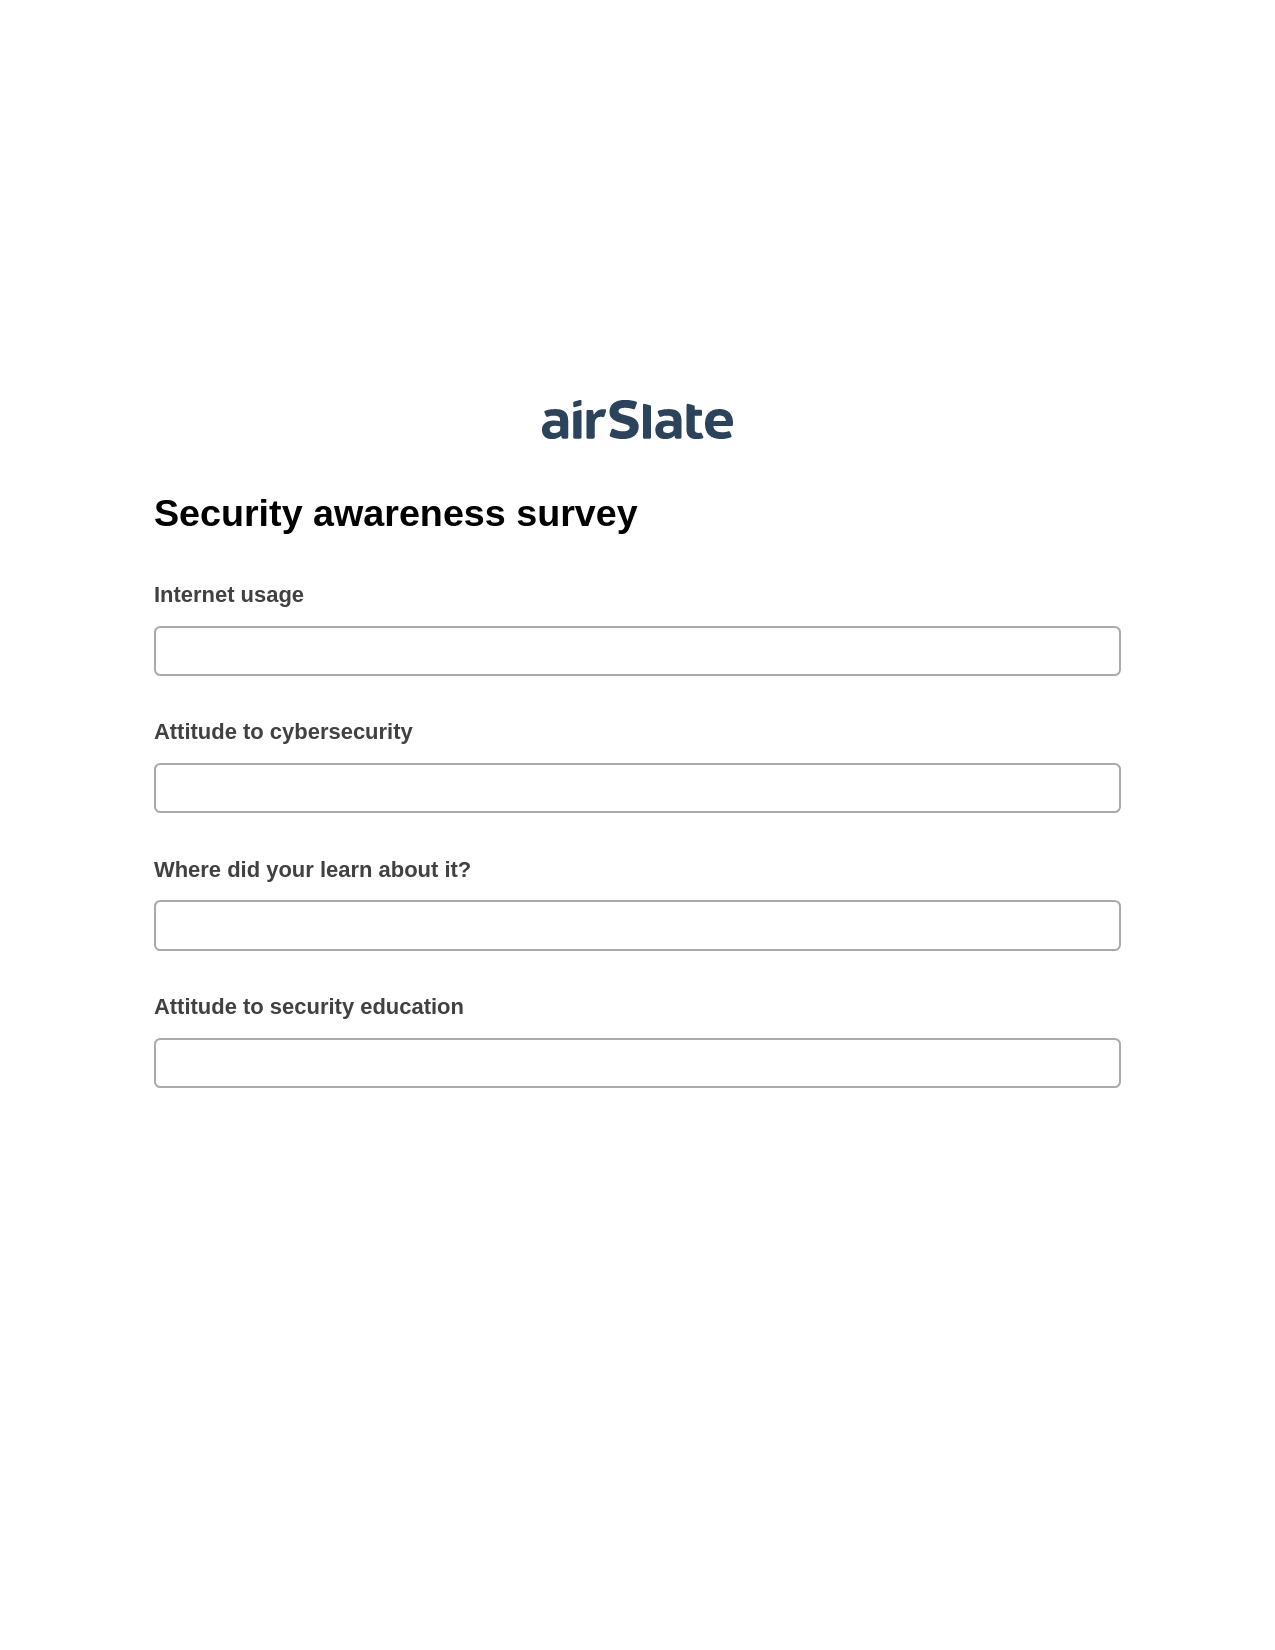 Security awareness survey Pre-fill from CSV File Bot, Create Salesforce Record Bot, Archive to SharePoint Folder Bot